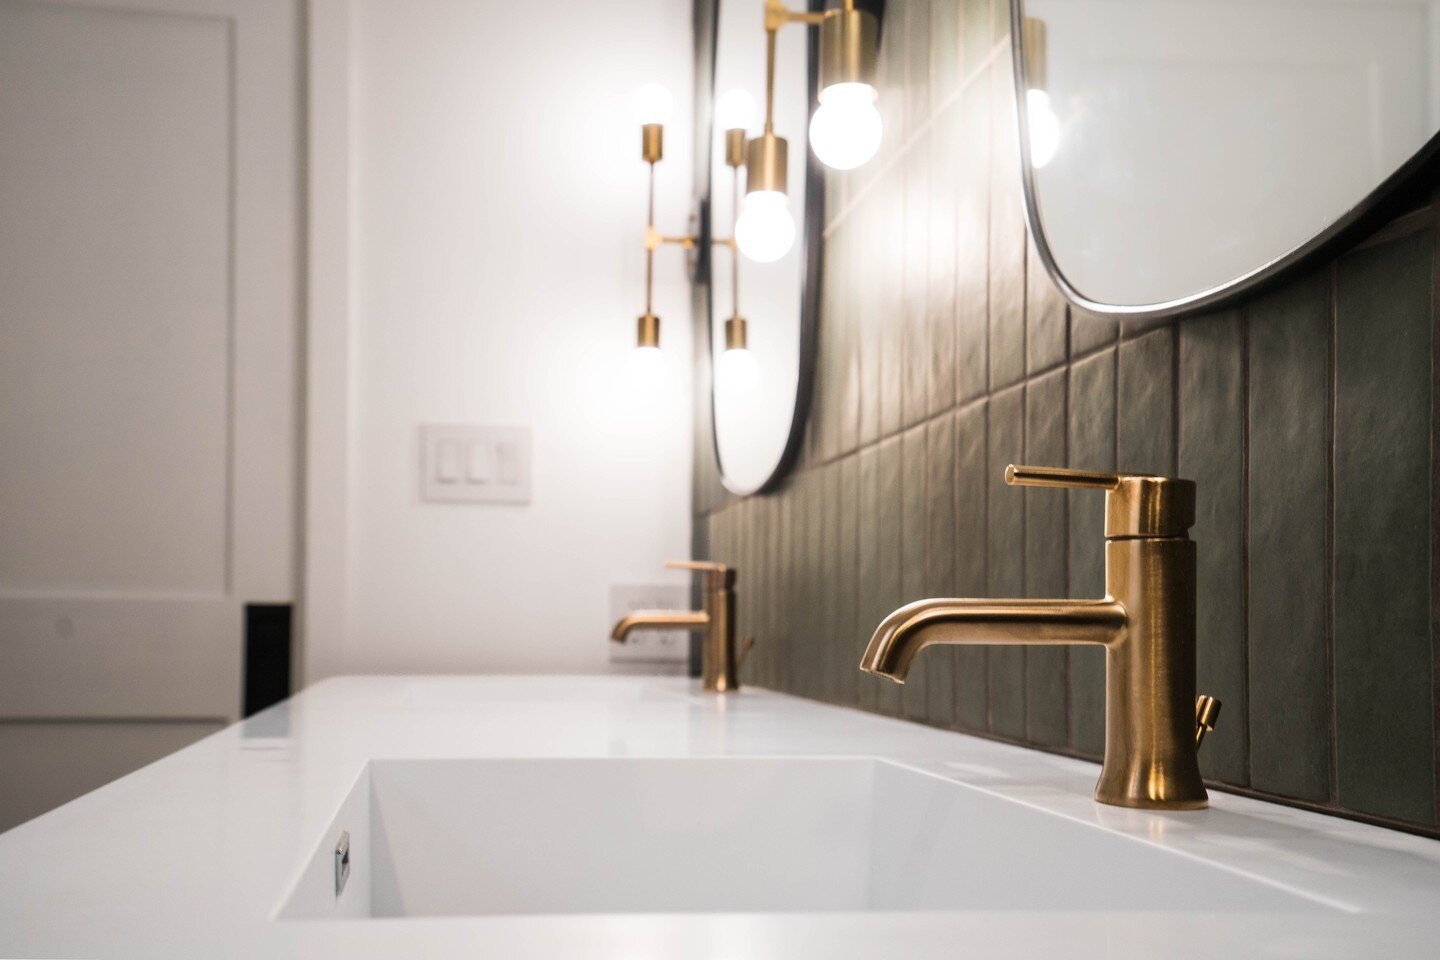 It's a mood✨

No boundaries, just endless possibilities. From sleek modern fixtures to deep colored tiles, this remodel is all about designing without limits. Say goodbye to the ordinary and hello to a space that reflects elegance and style. Swipe le